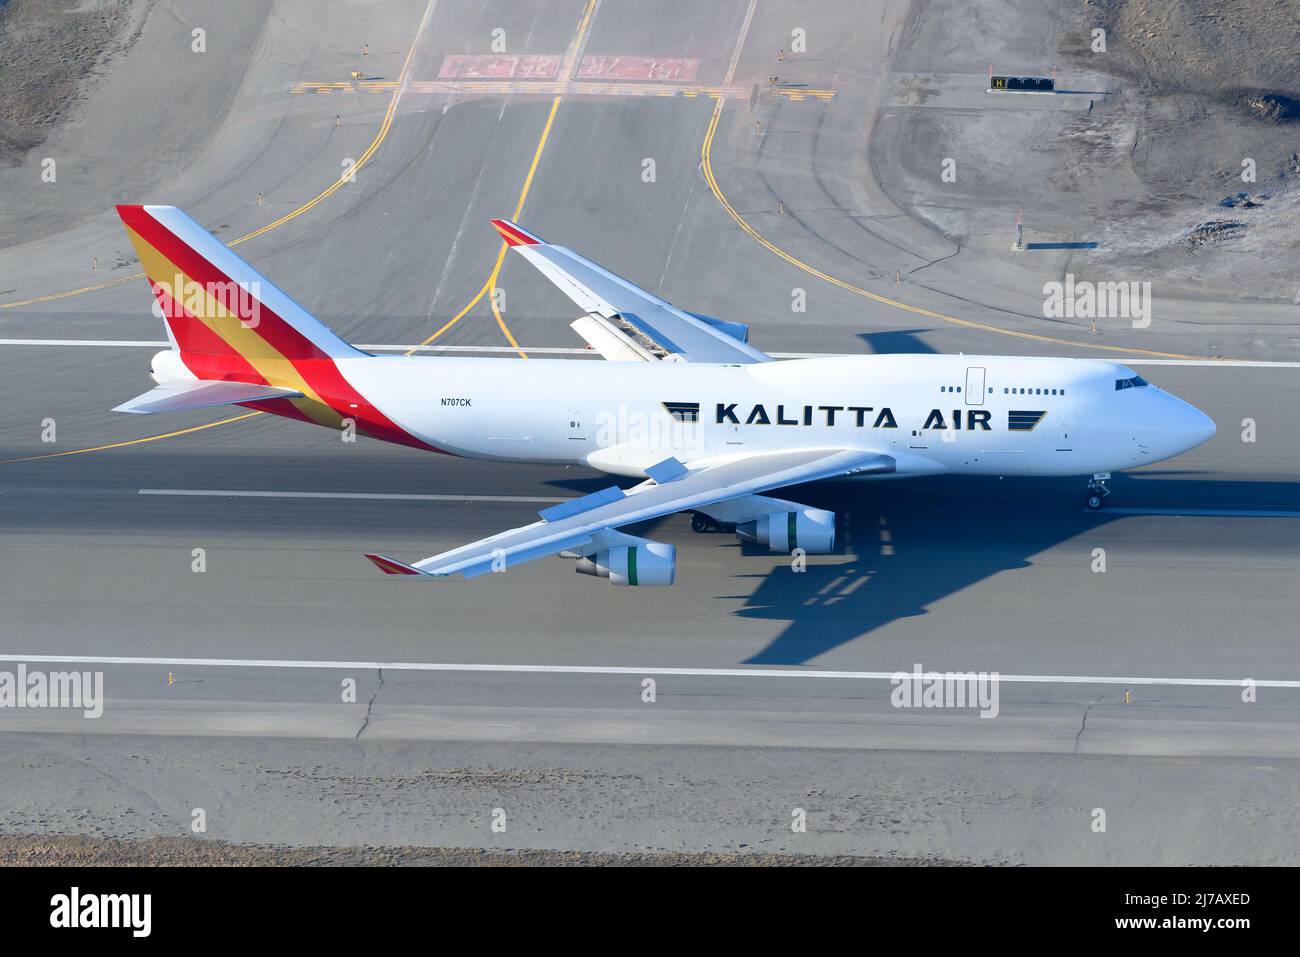 Kalitta Air Boeing 747 freighter aircraft landing. Large cargo airplane 747-400F from above. Plane 747F on runway with reverse thrust jet engine open. Stock Photo